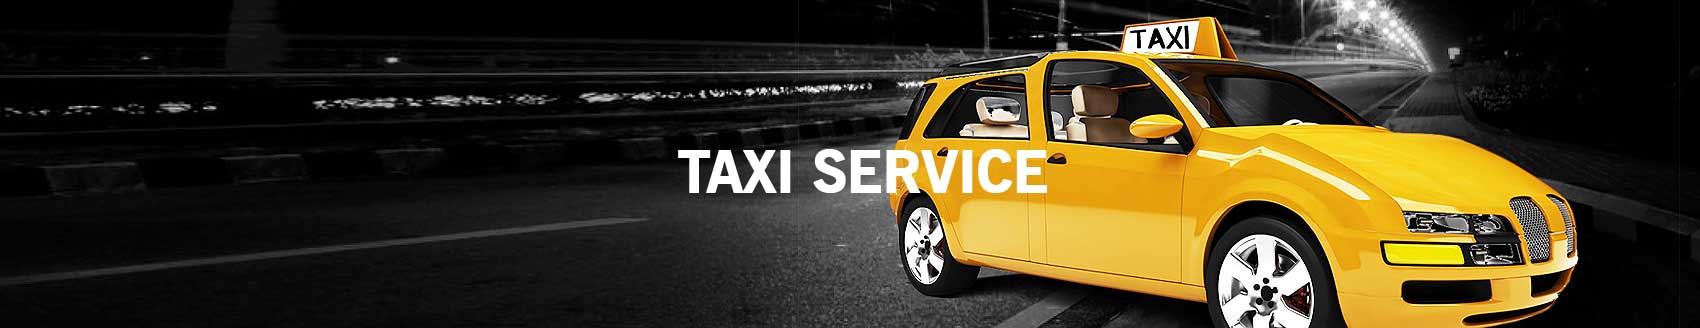 Affordable Chandigarh to Delhi taxi  | Northern Cabs  | Chandigarh to Delhi, taxi, Trusted taxi Chandigarh to Delhi,taxi Chandigarh to Delhi, Chandigarh to Delhi taxi service ,affordable Chandigarh to Delhi taxi,one way, Chandigarh to Delhi taxi - GL19050